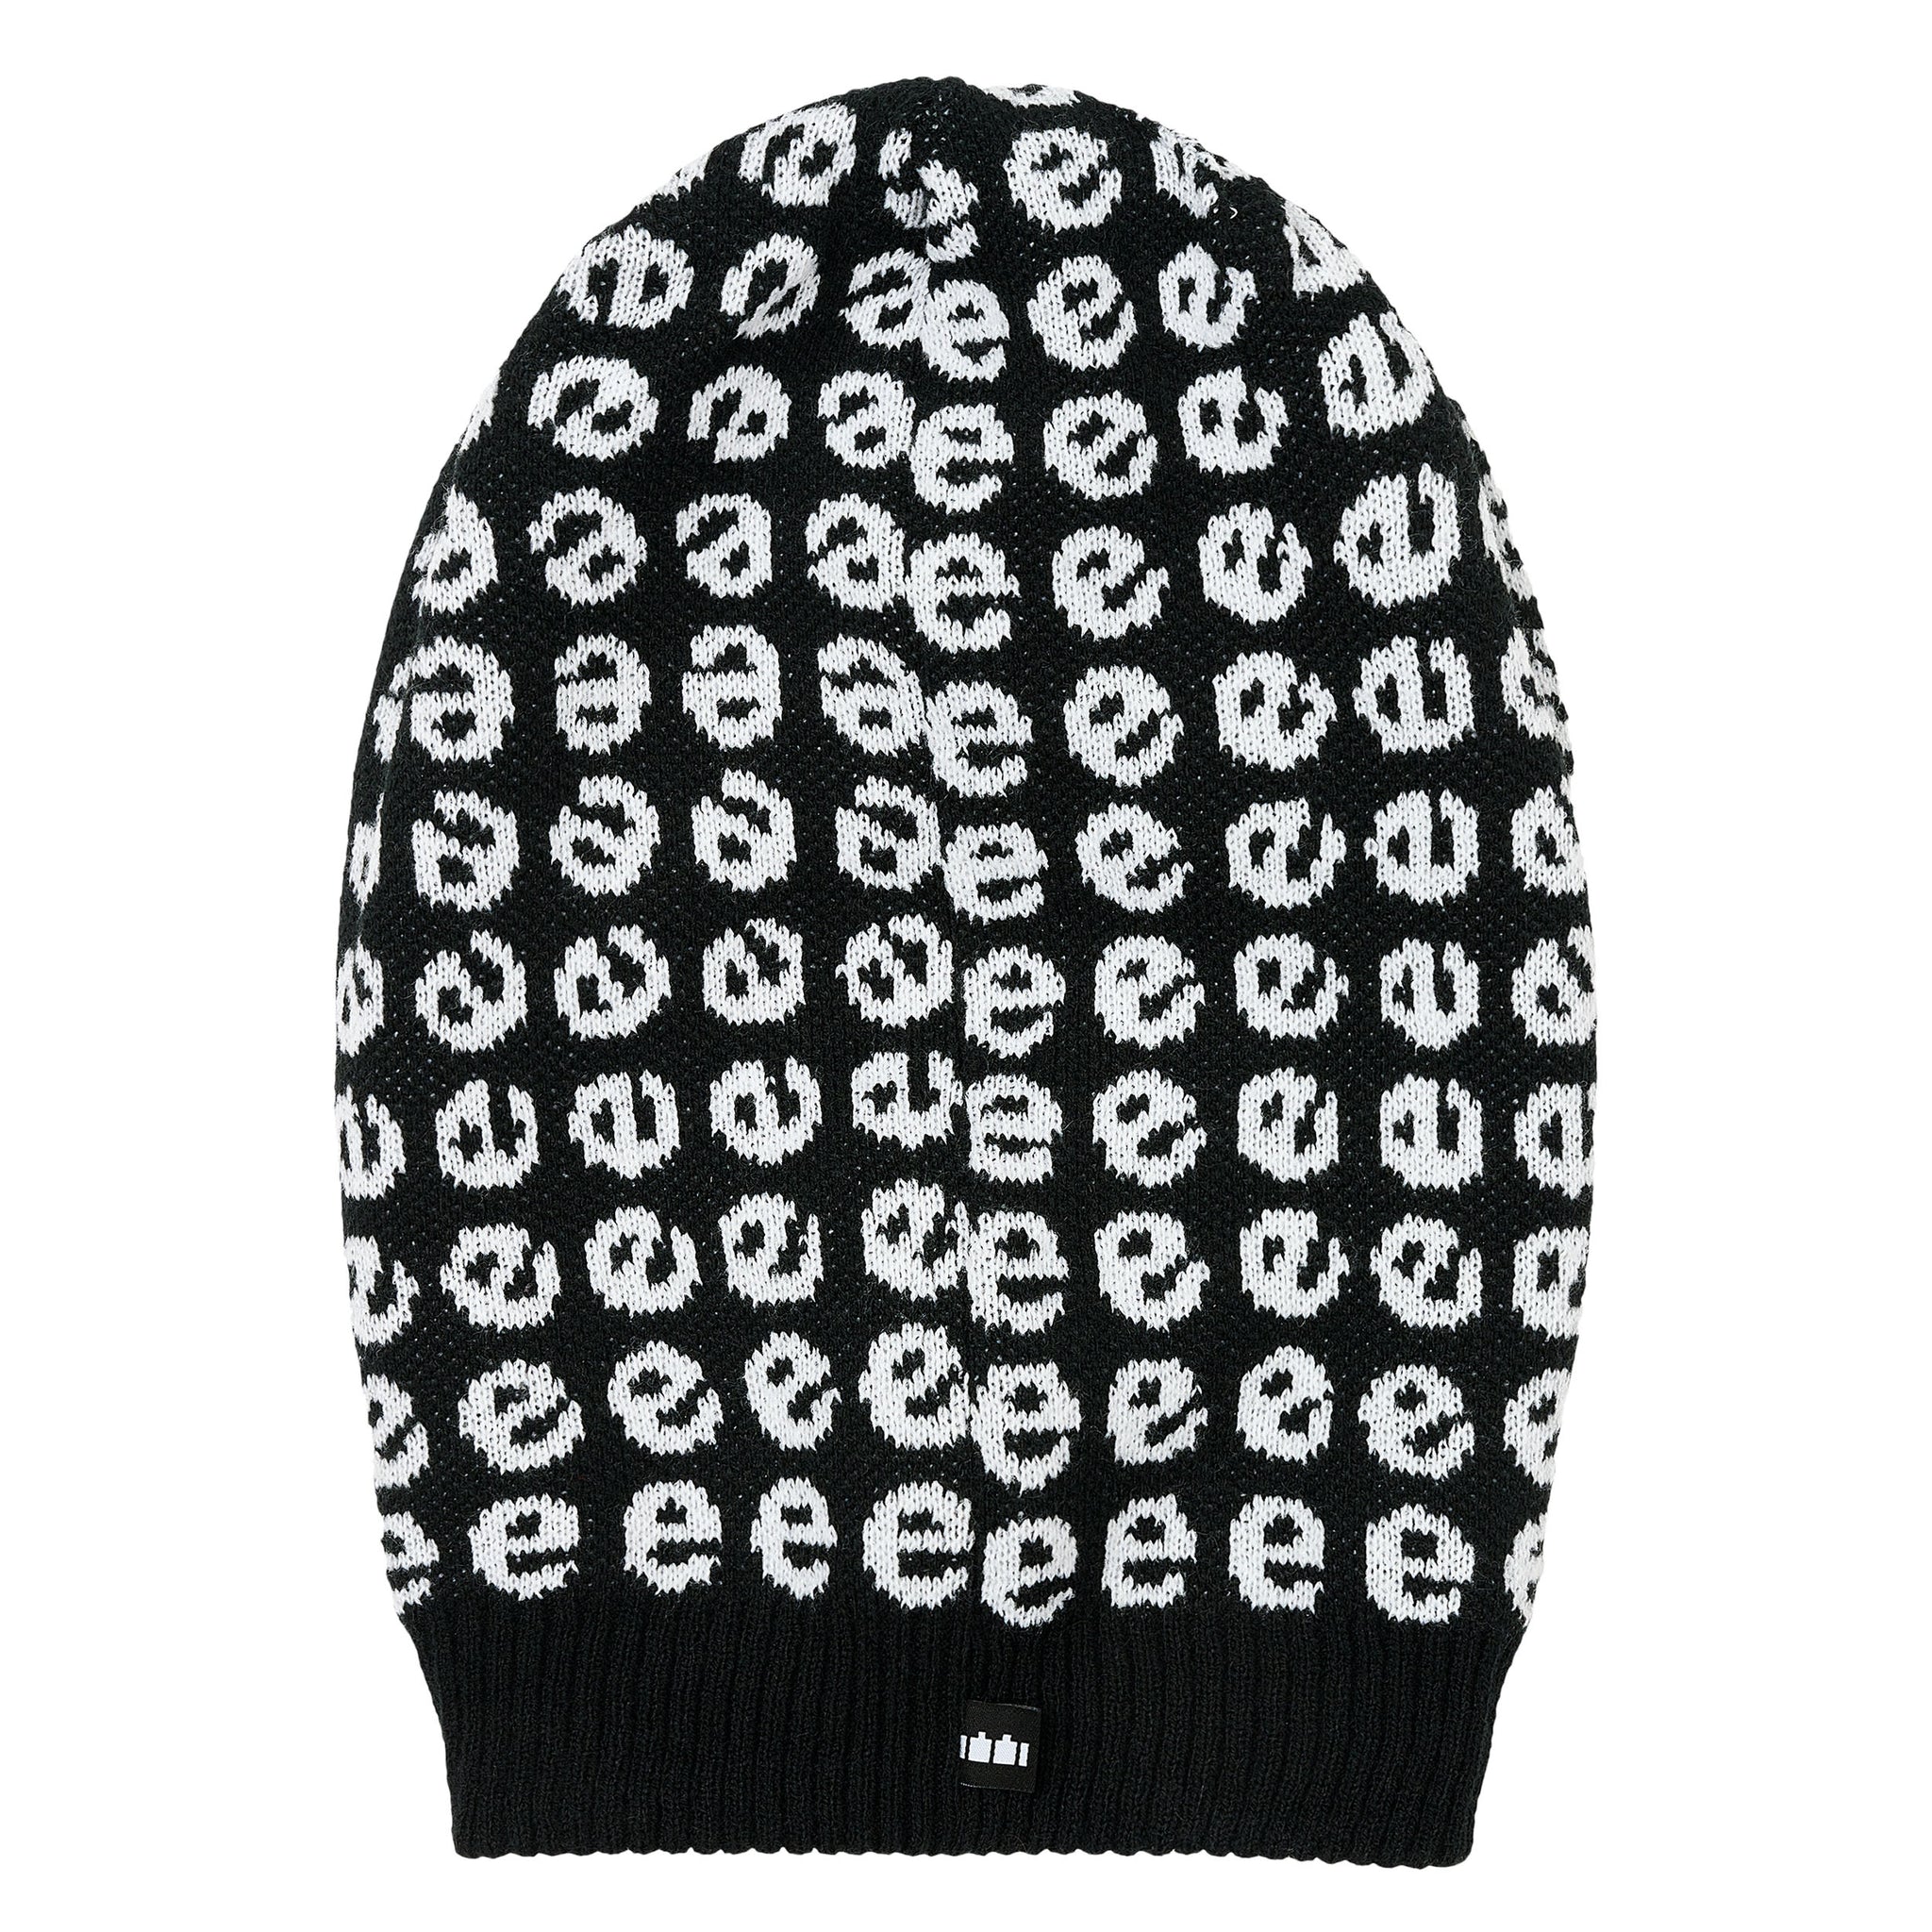 The Trilogy Tapes Reversible Knitted Hood Black